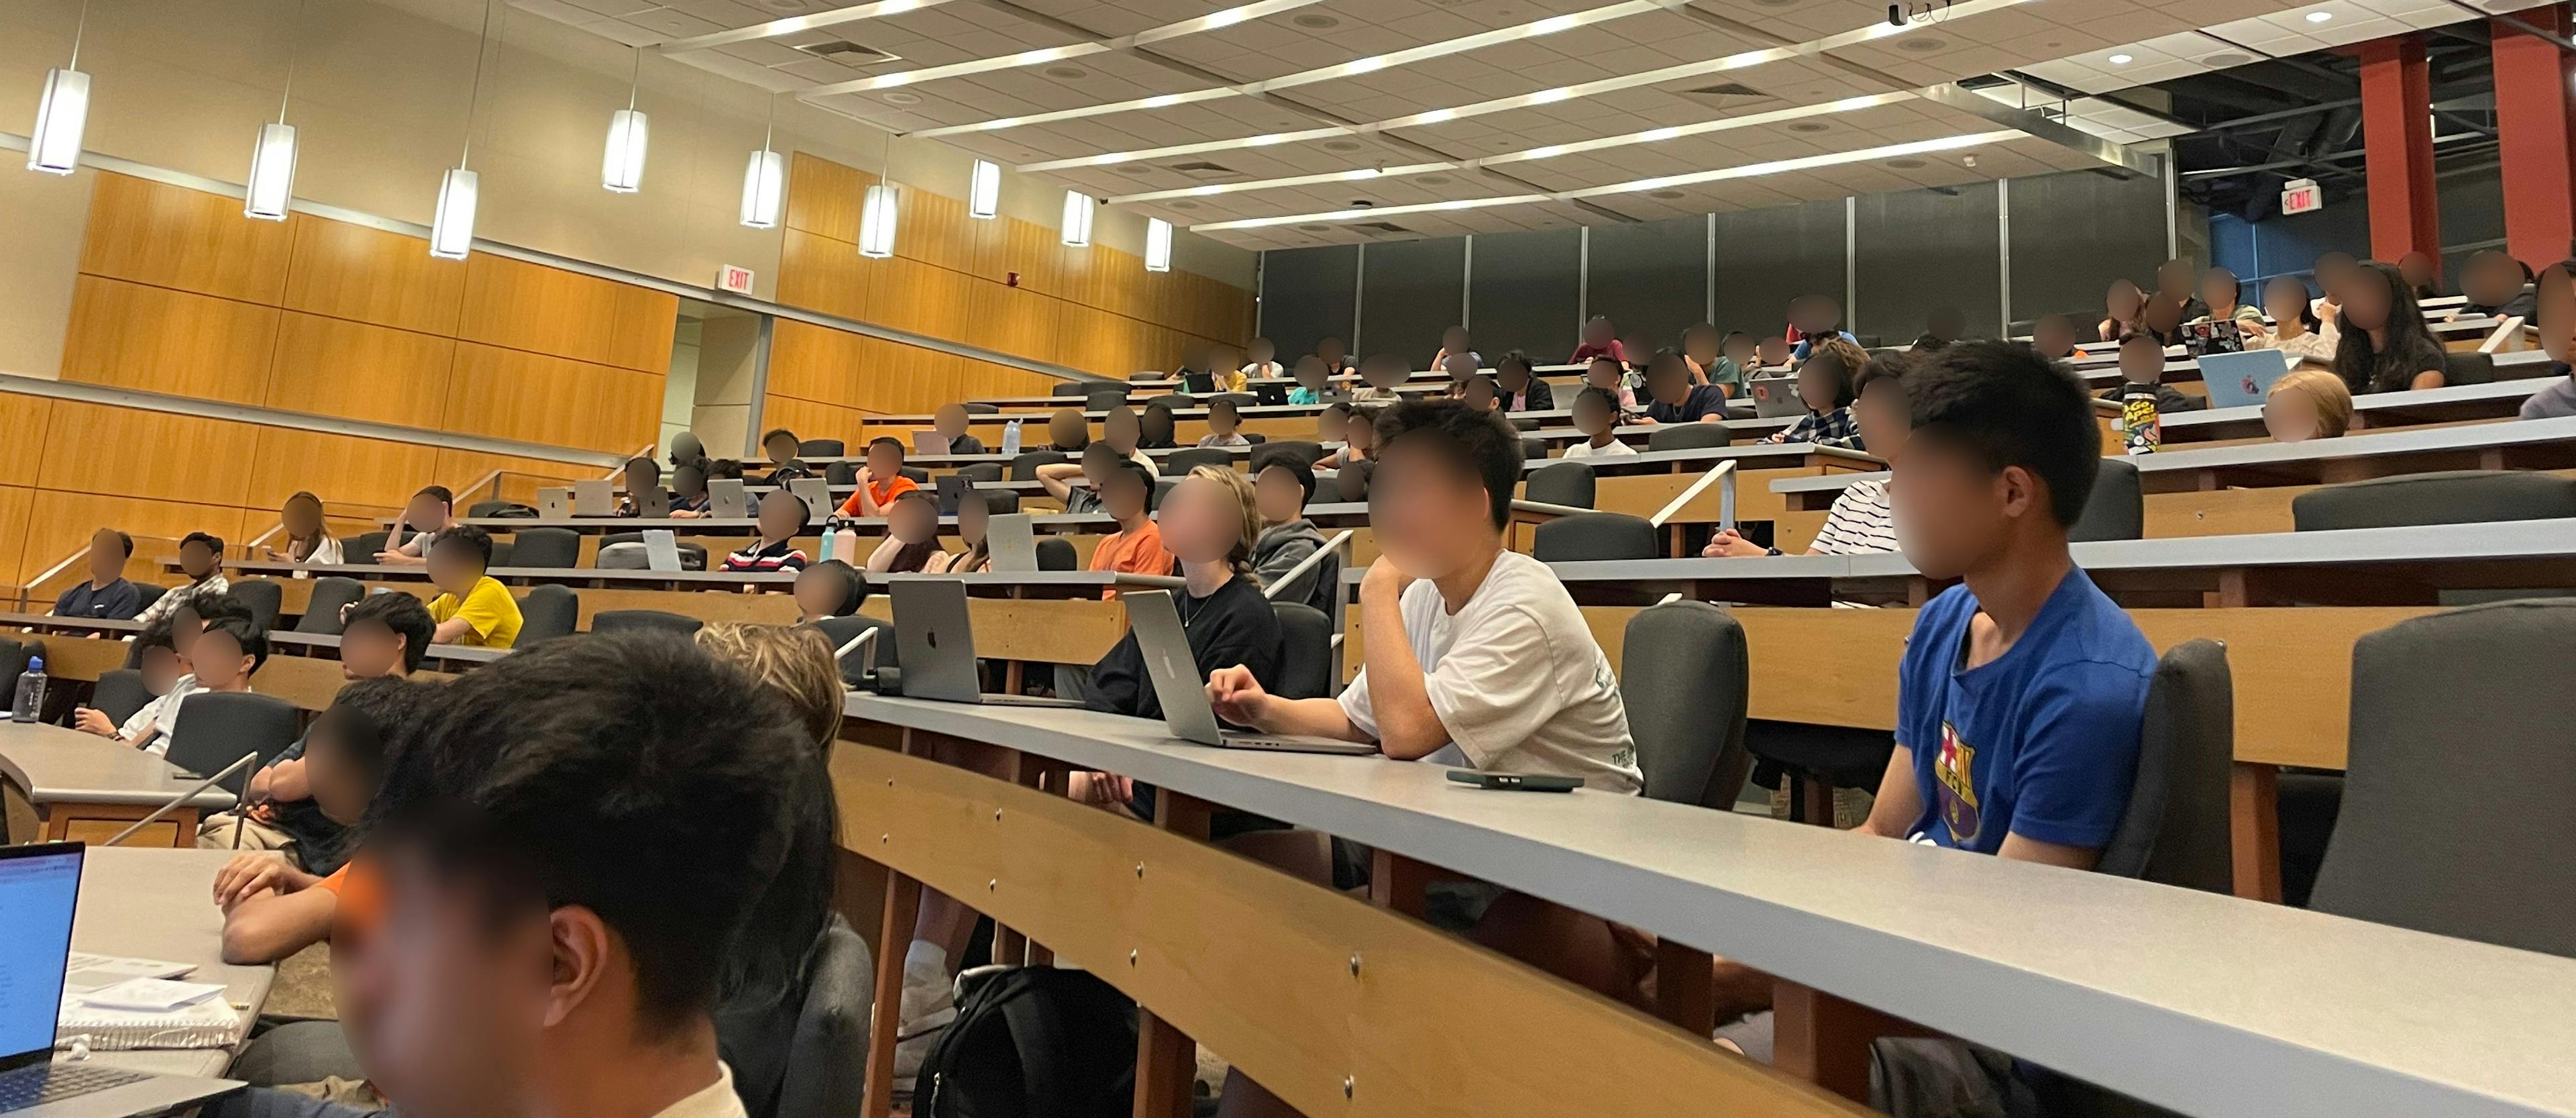 Students in a Project: Code meeting in a lecture hall